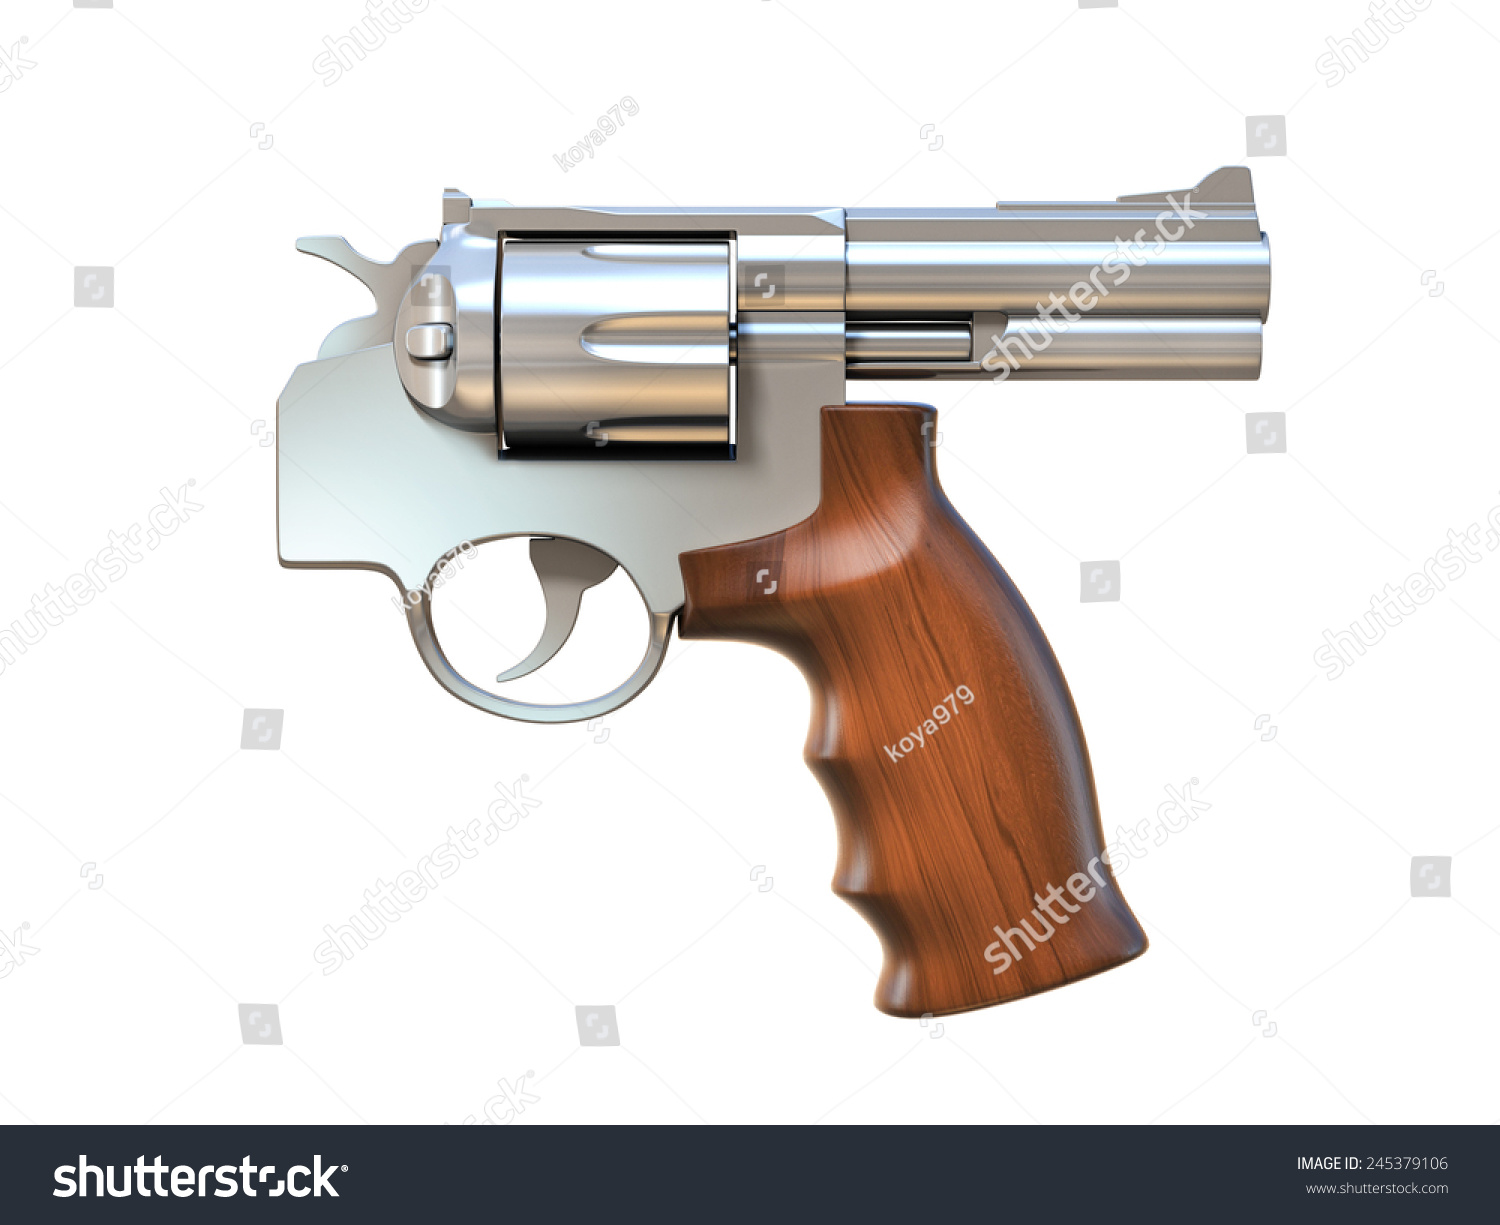 stock-photo-gun-pointing-on-the-wrong-direction-suicide-friendly-fire-d-concept-245379106.jpg